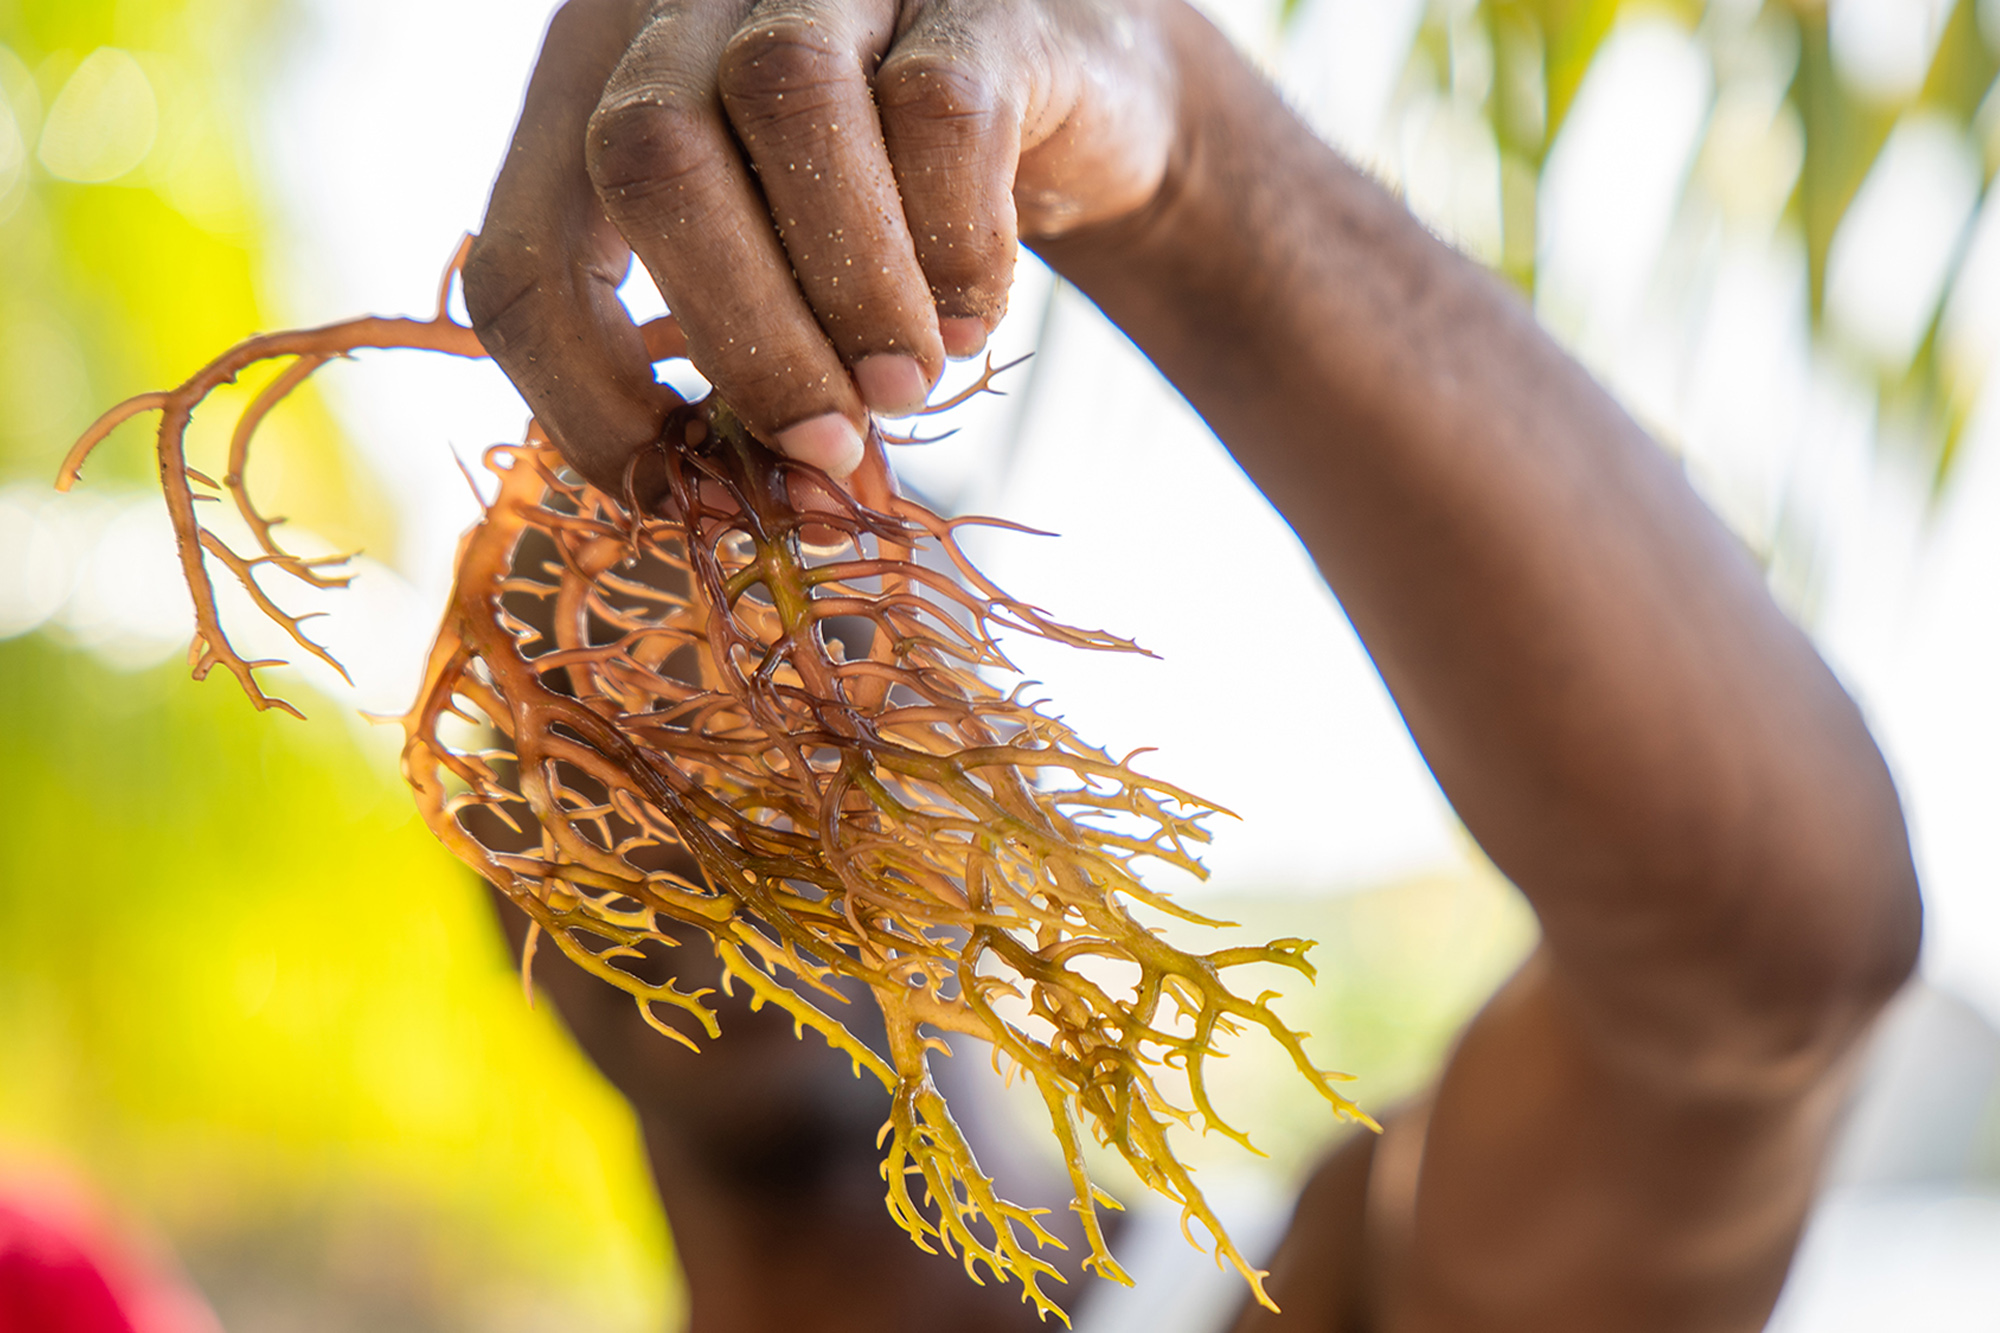 Seaweed farming is a process that includes the harvesting of algae, removal of foreign weeds and debris, bleaching, and sun-drying the harvested algae, followed by packaging the dried product for sale.